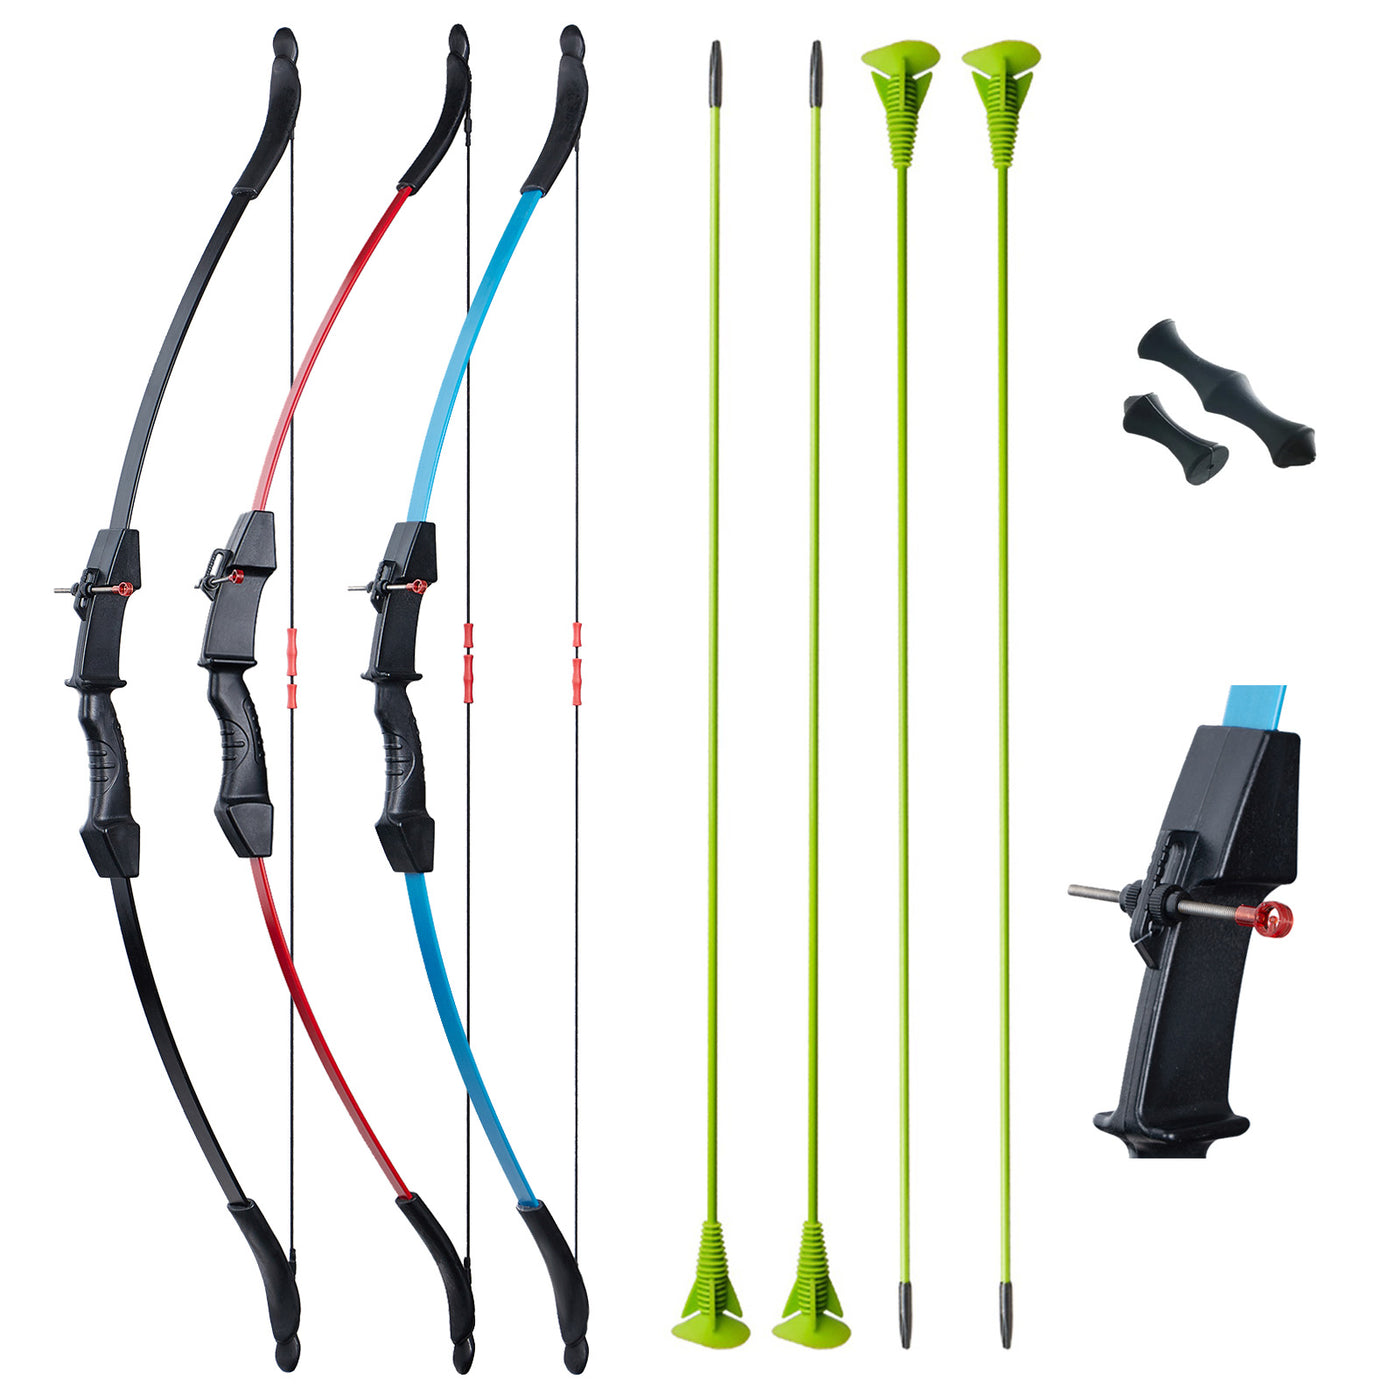 Kids Takedown Black/Blue/Red Archery Bow with 4 Sucker Arrows String Sight Finger Saver 10-13lbs